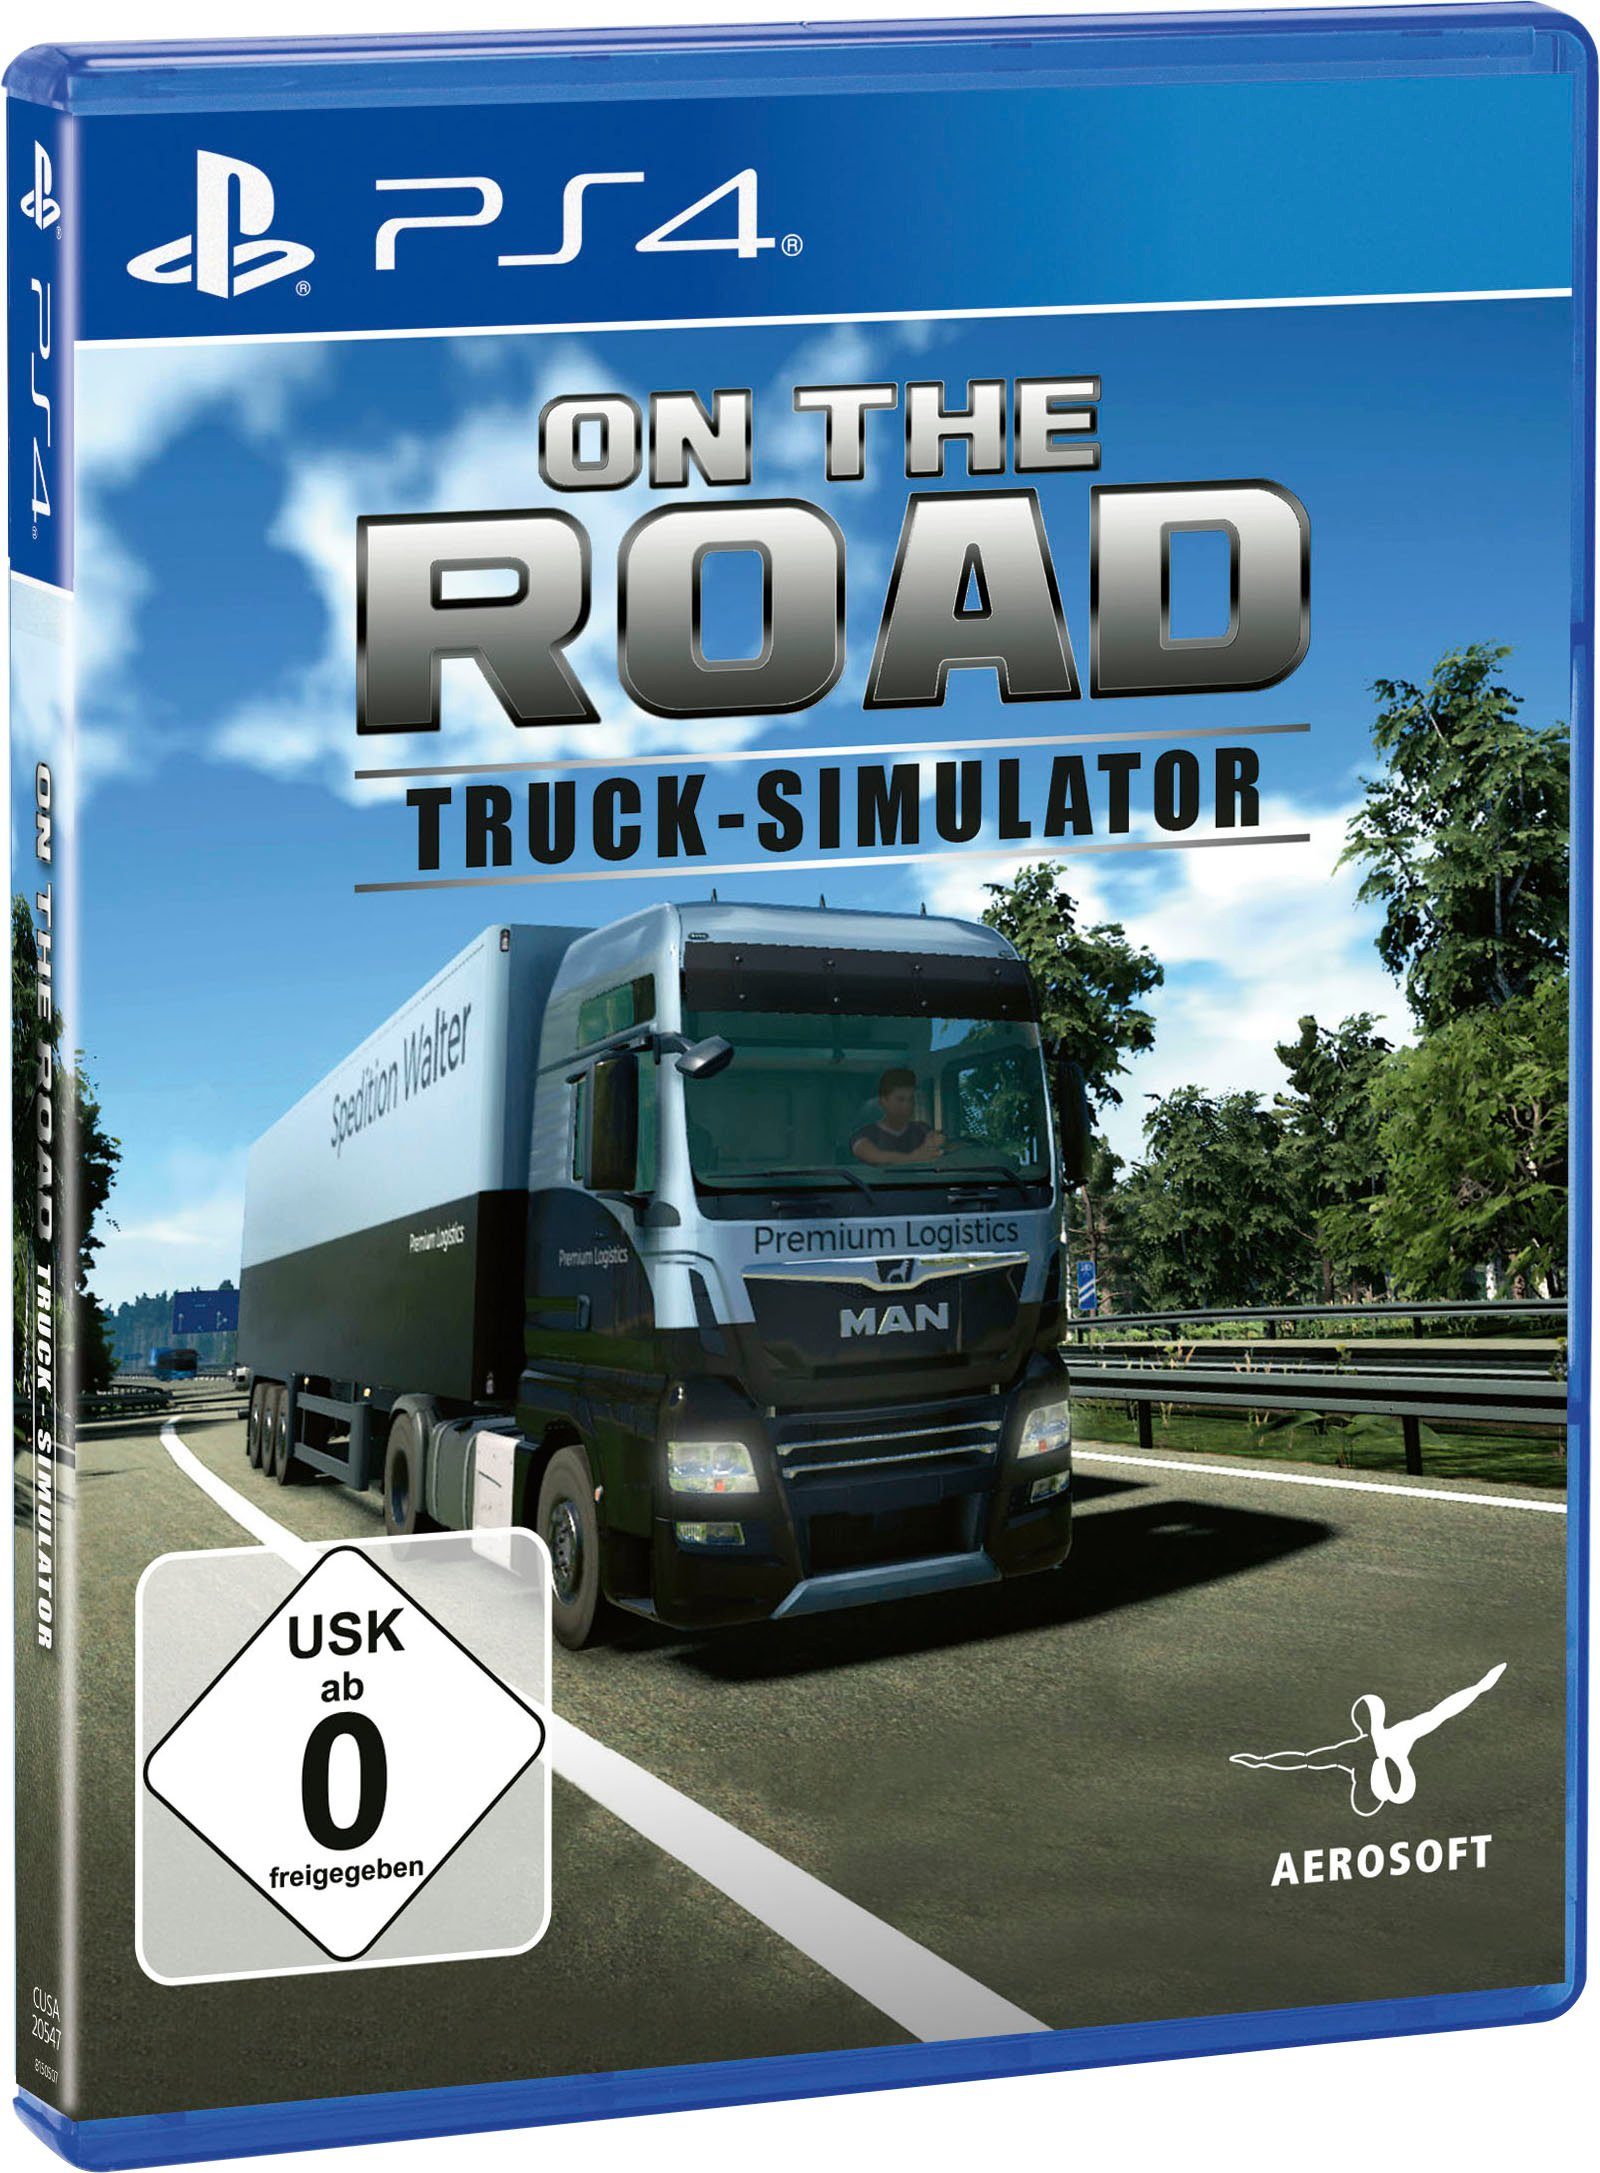 Truck Simulator - On the 4 PlayStation Road